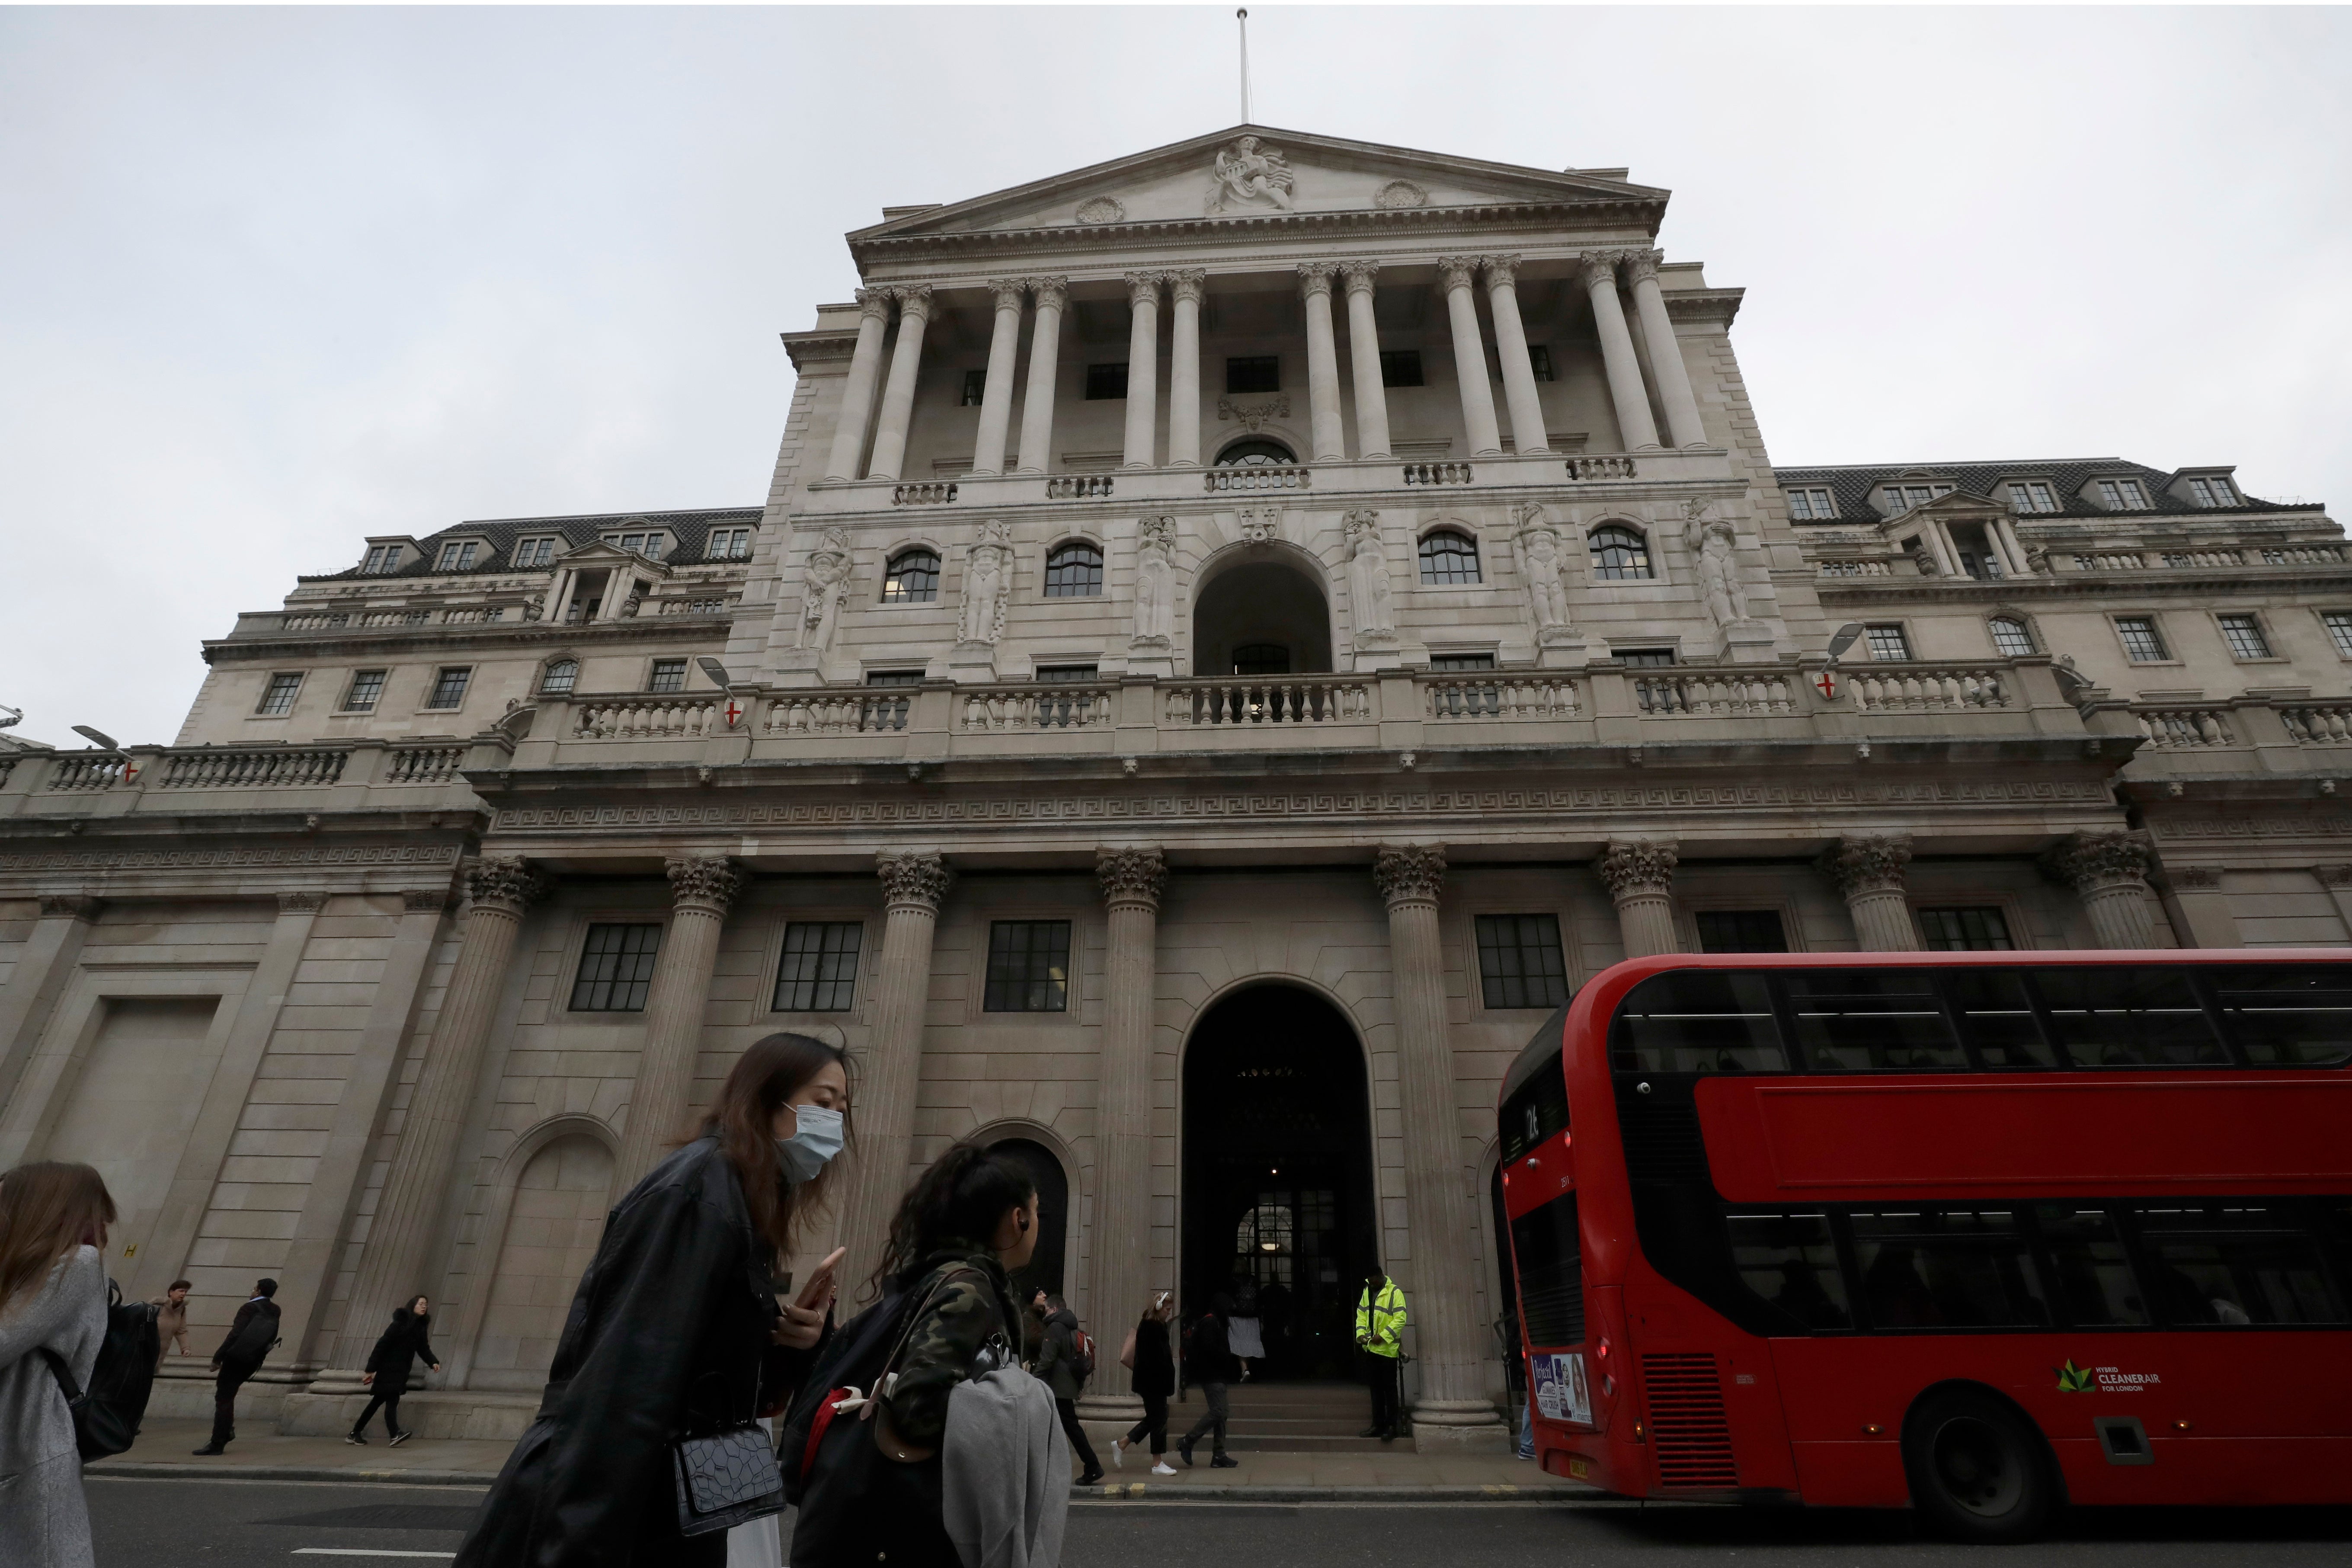 Only 33 per cent of the public express themselves happy with the Bank of England’s performance